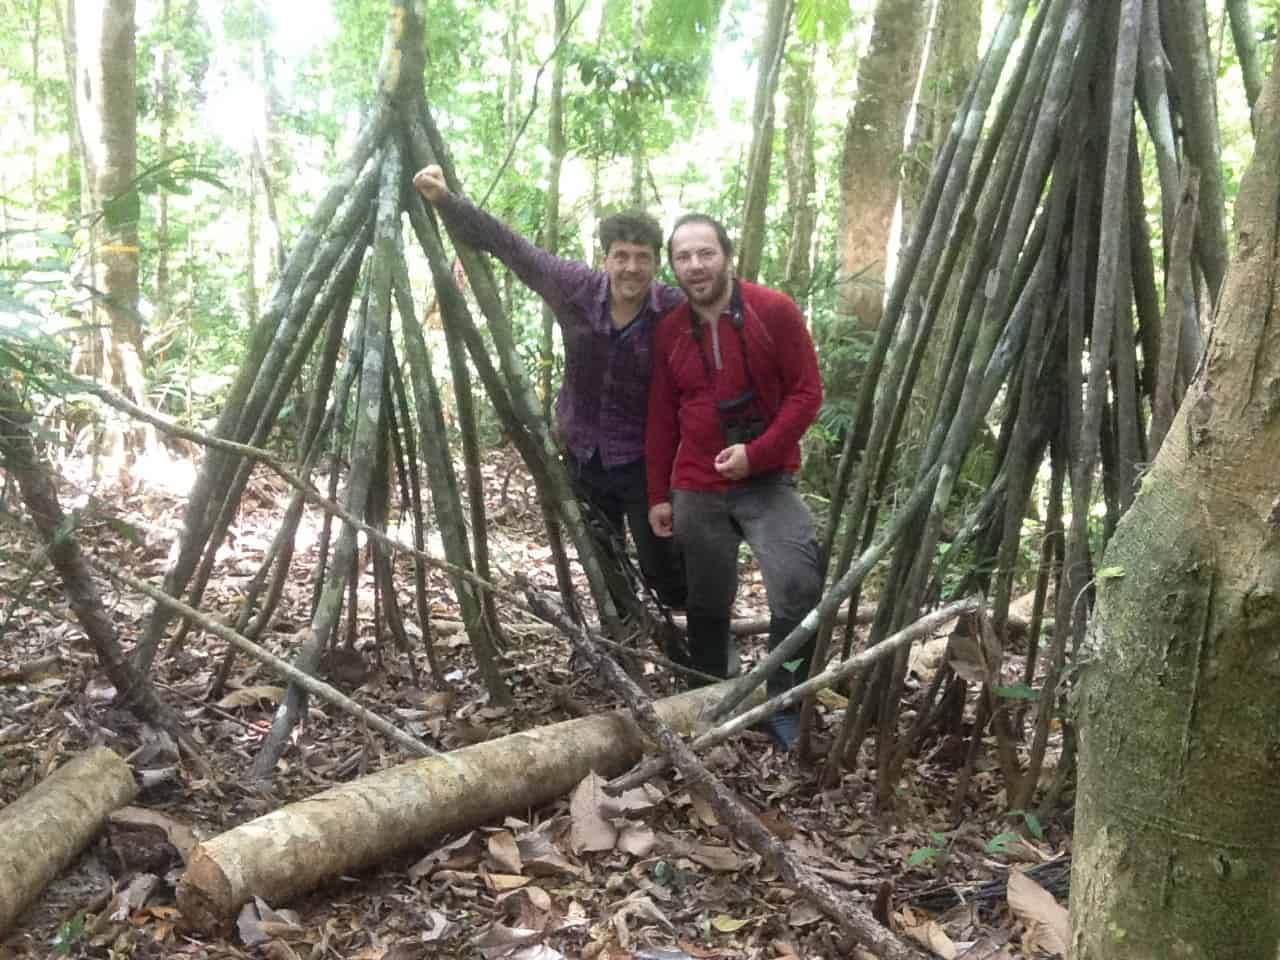 Lead author Florian Hofhansl and field botanist, Eduardo Chacon-Madrigal got stuck between roots of the walking palm (Socratea exorrhiza), while surveying one of the twenty one-hectare permanent inventory plots 